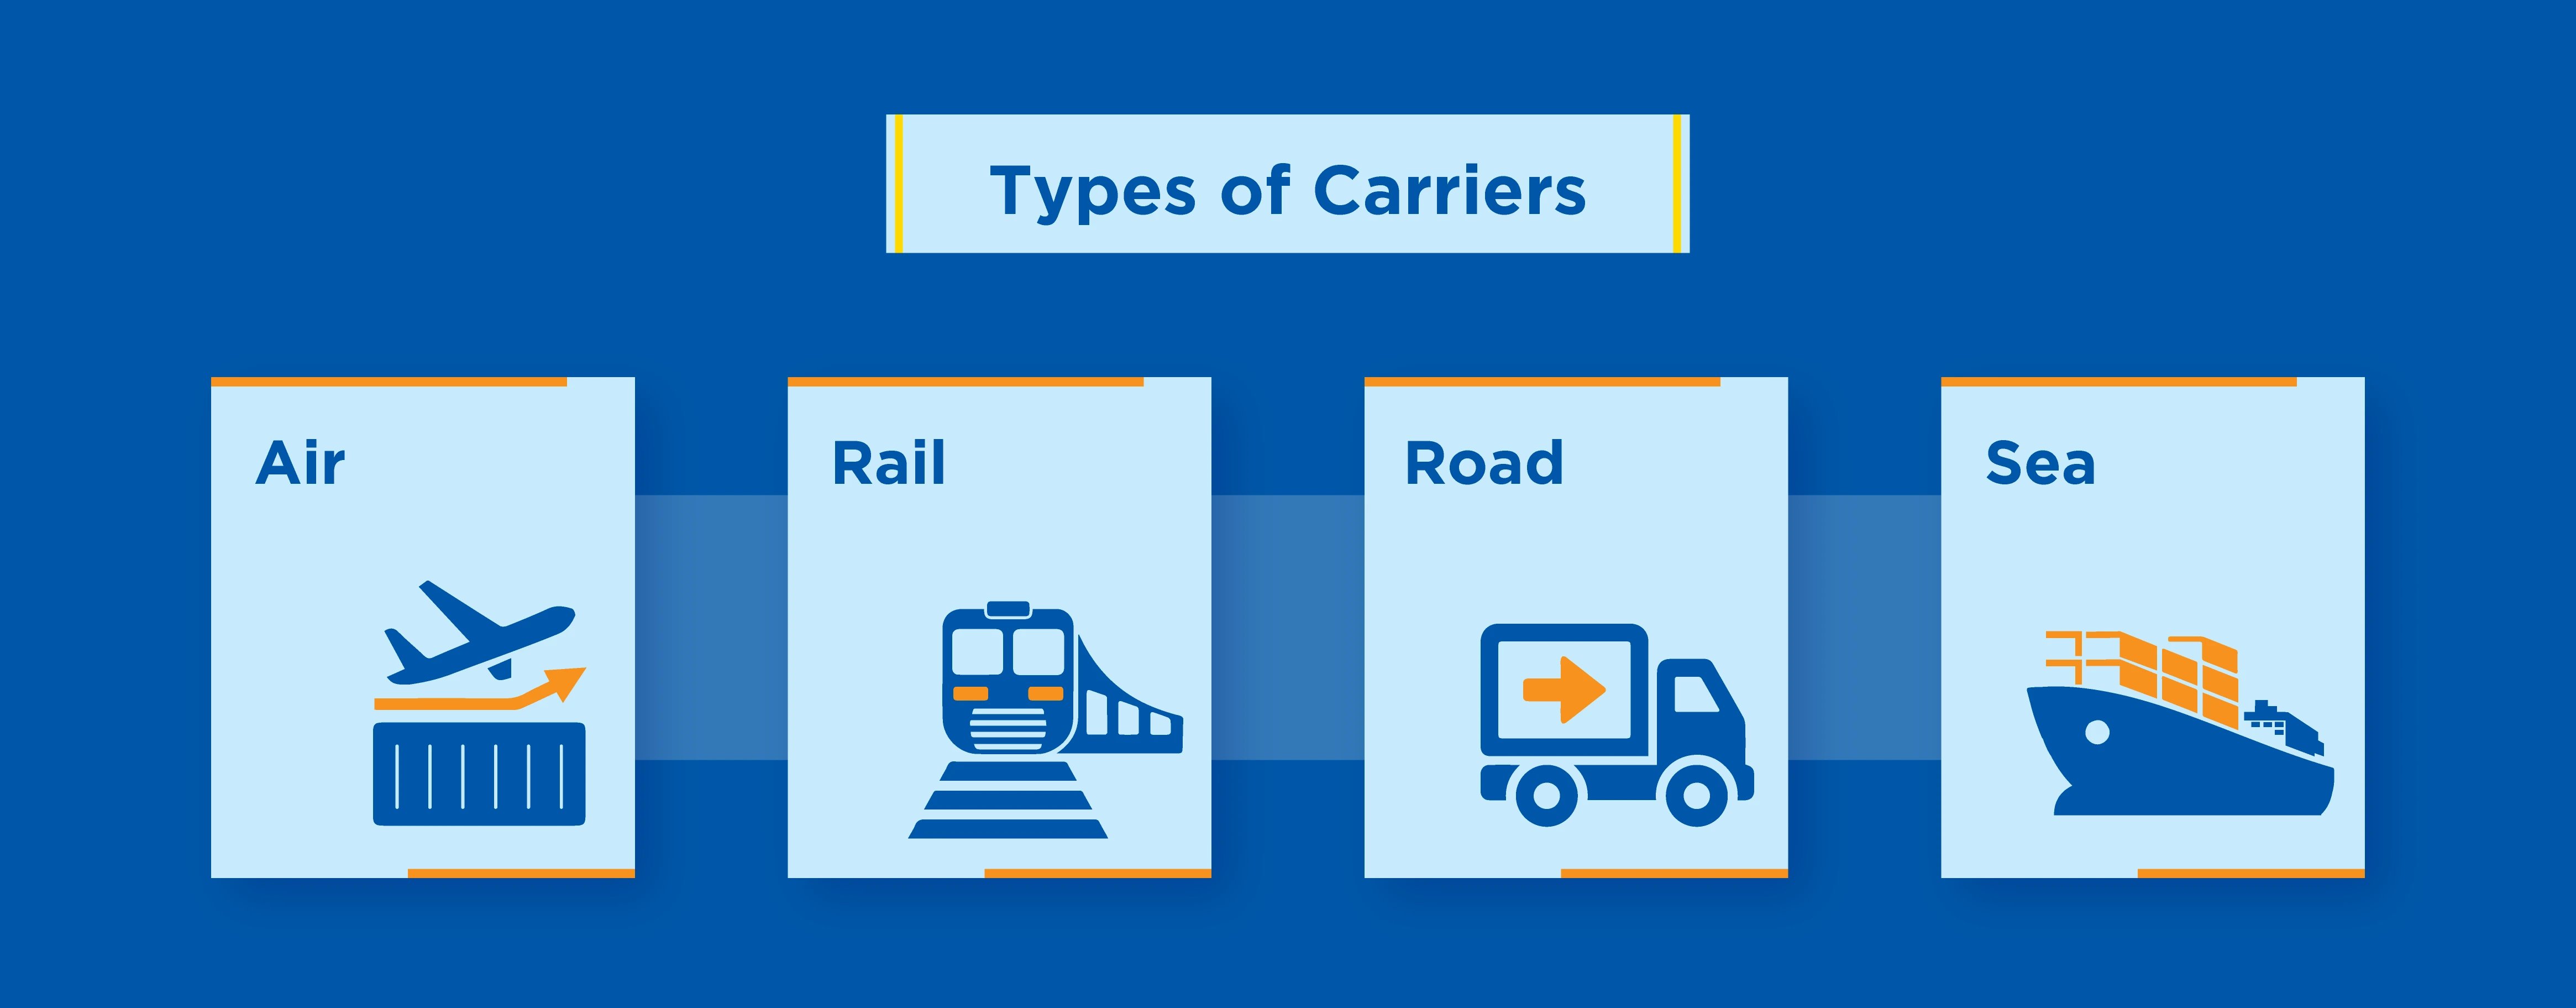 Types-of-Carriers